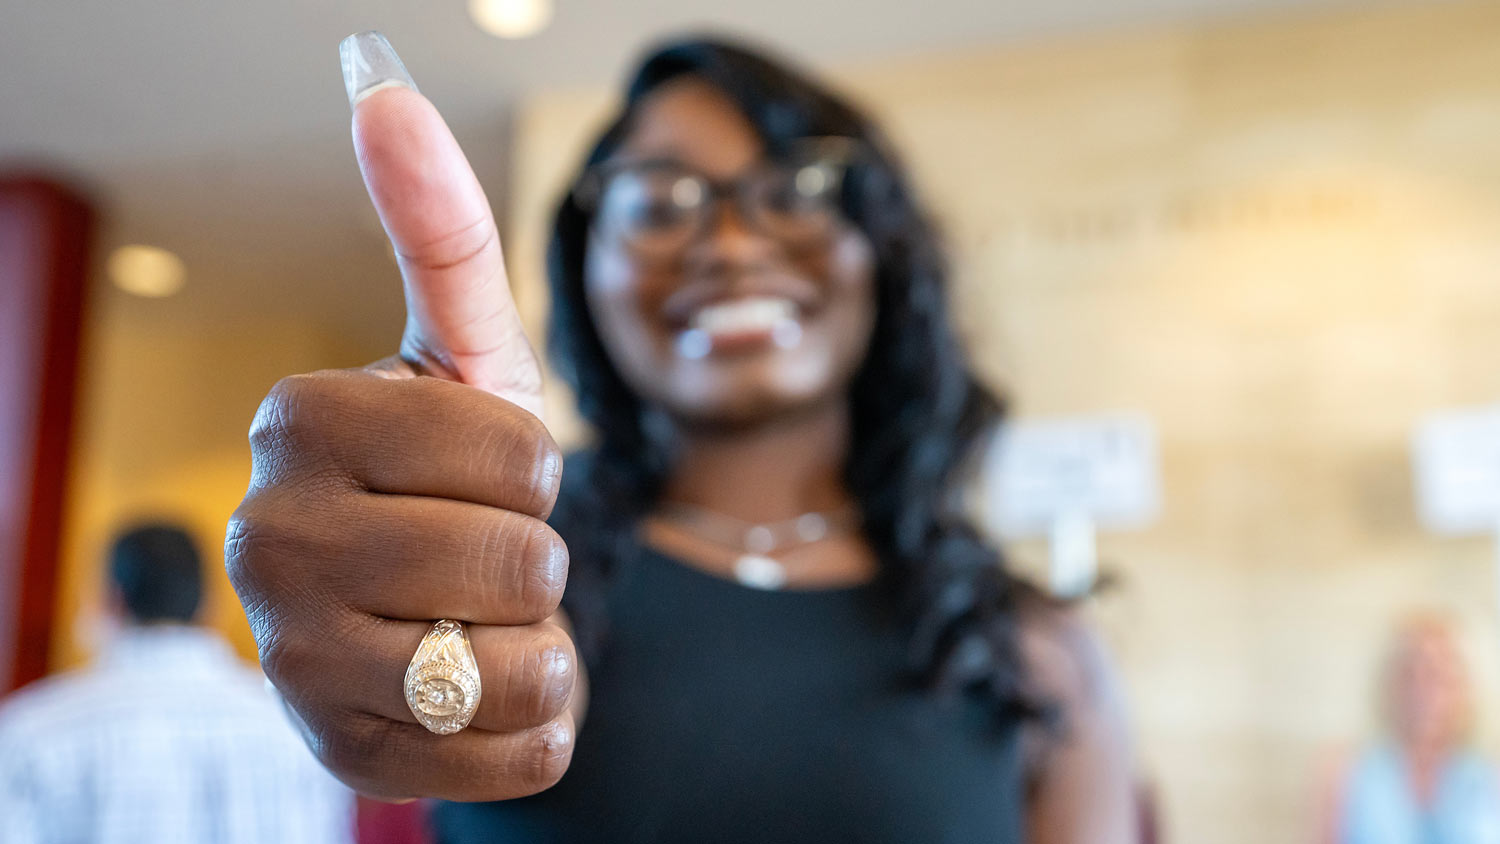 Close up of an Aggie ring on a student's hand as she gives a Gig 'Em